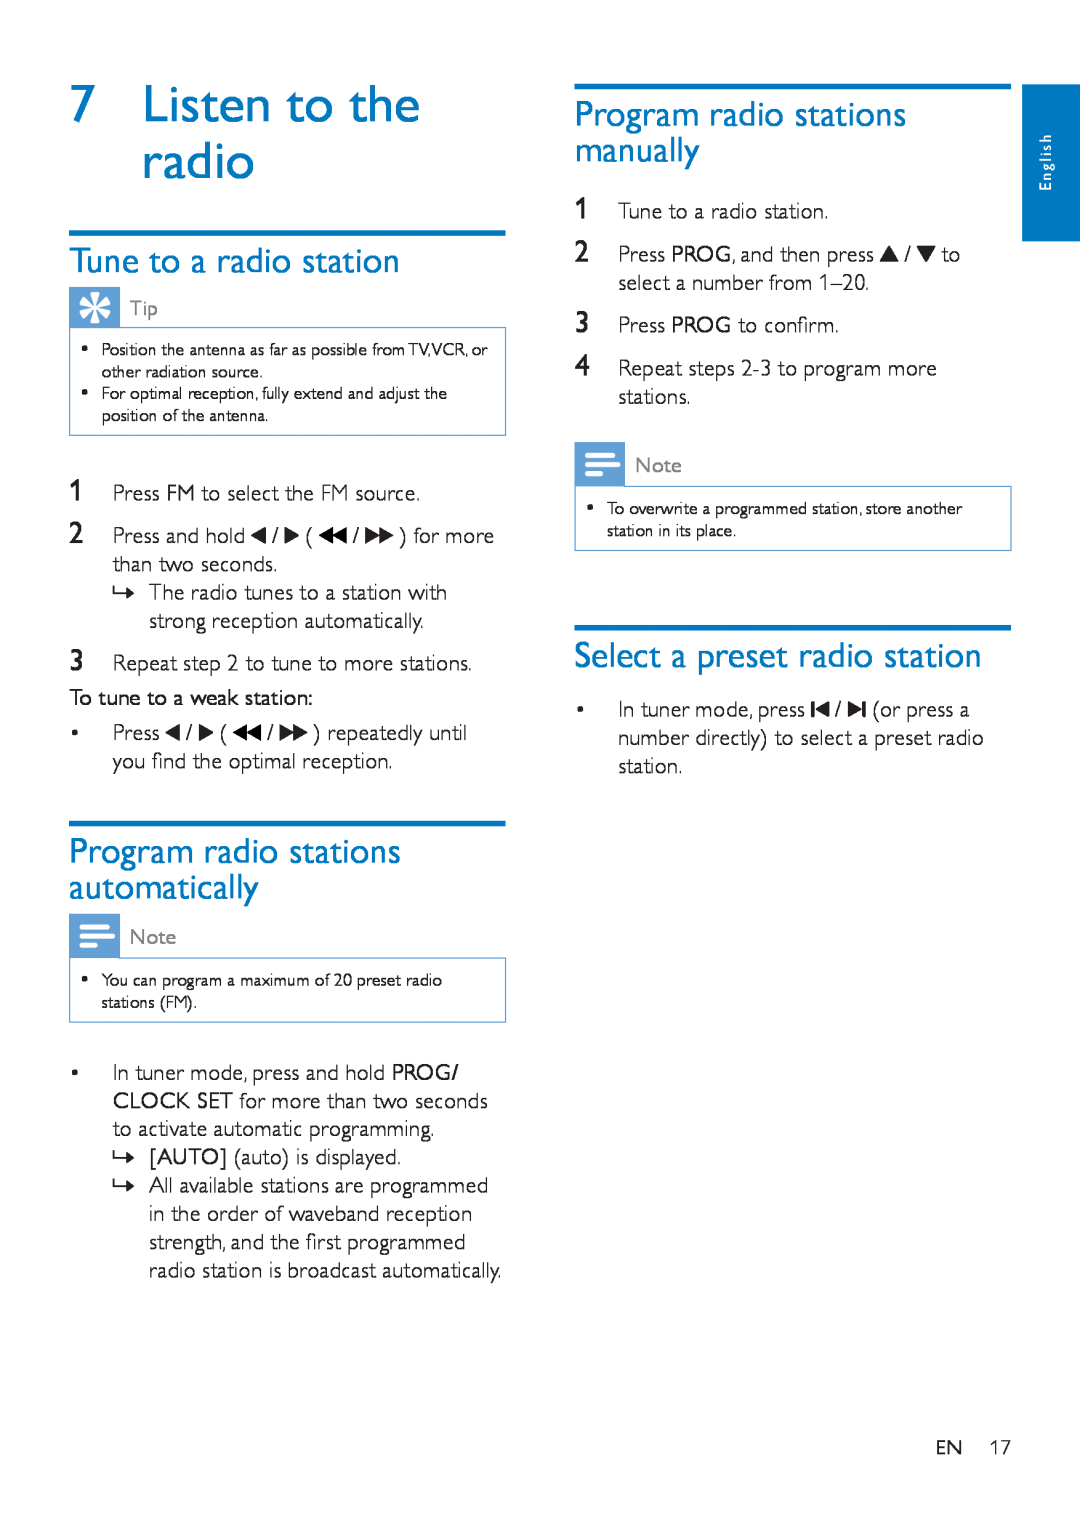 Philips MCD5110 user manual 7Listen to the radio, Tune to a radio station, Program radio stations automatically 